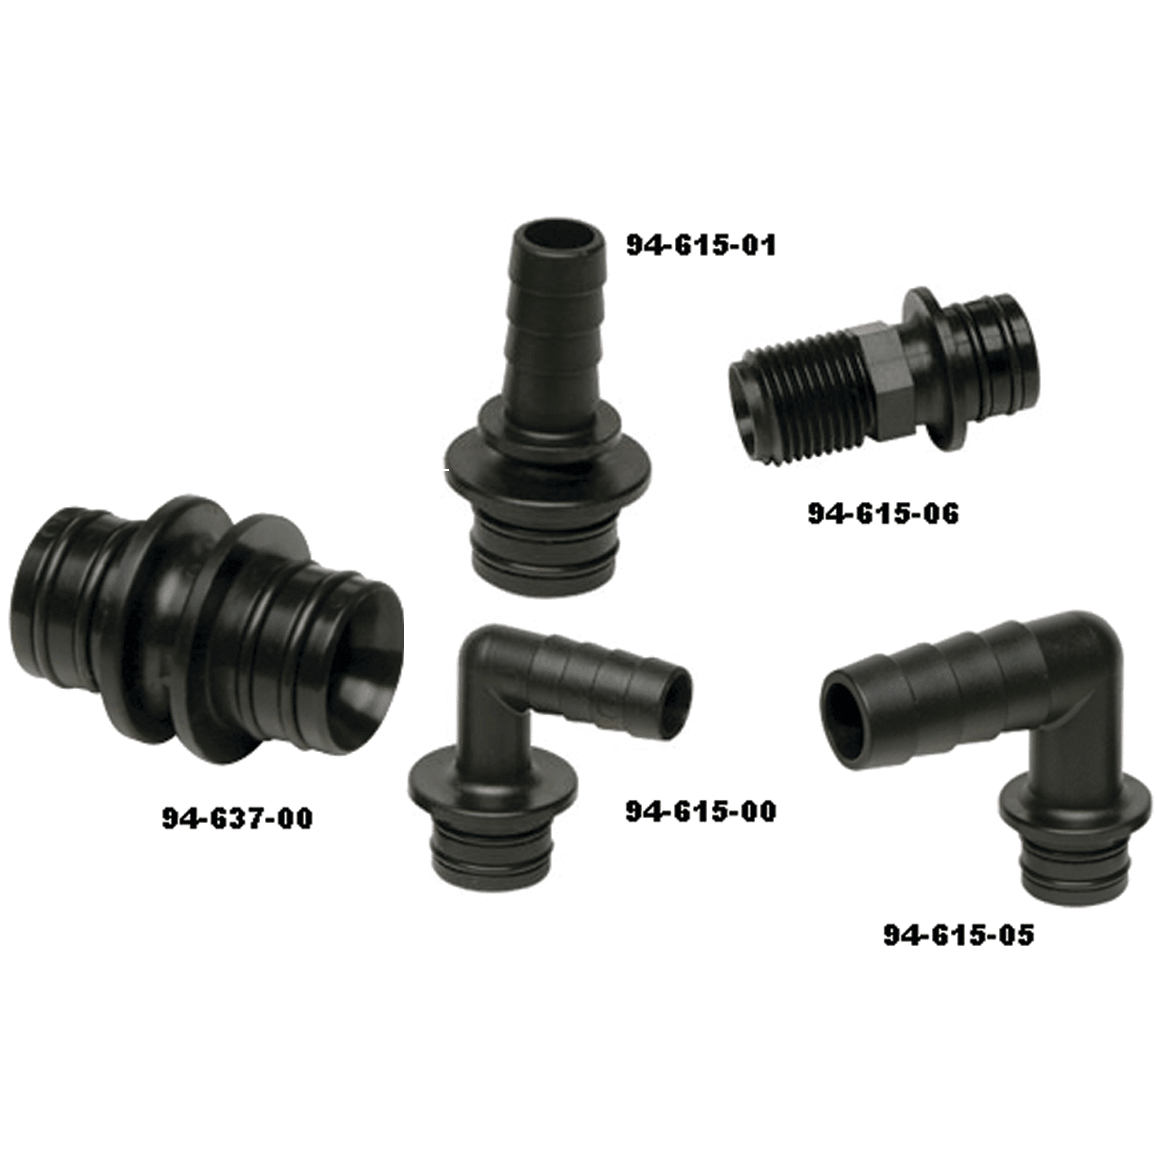 Accessory Quick-Connect Fittings for Extreme Series Pumps